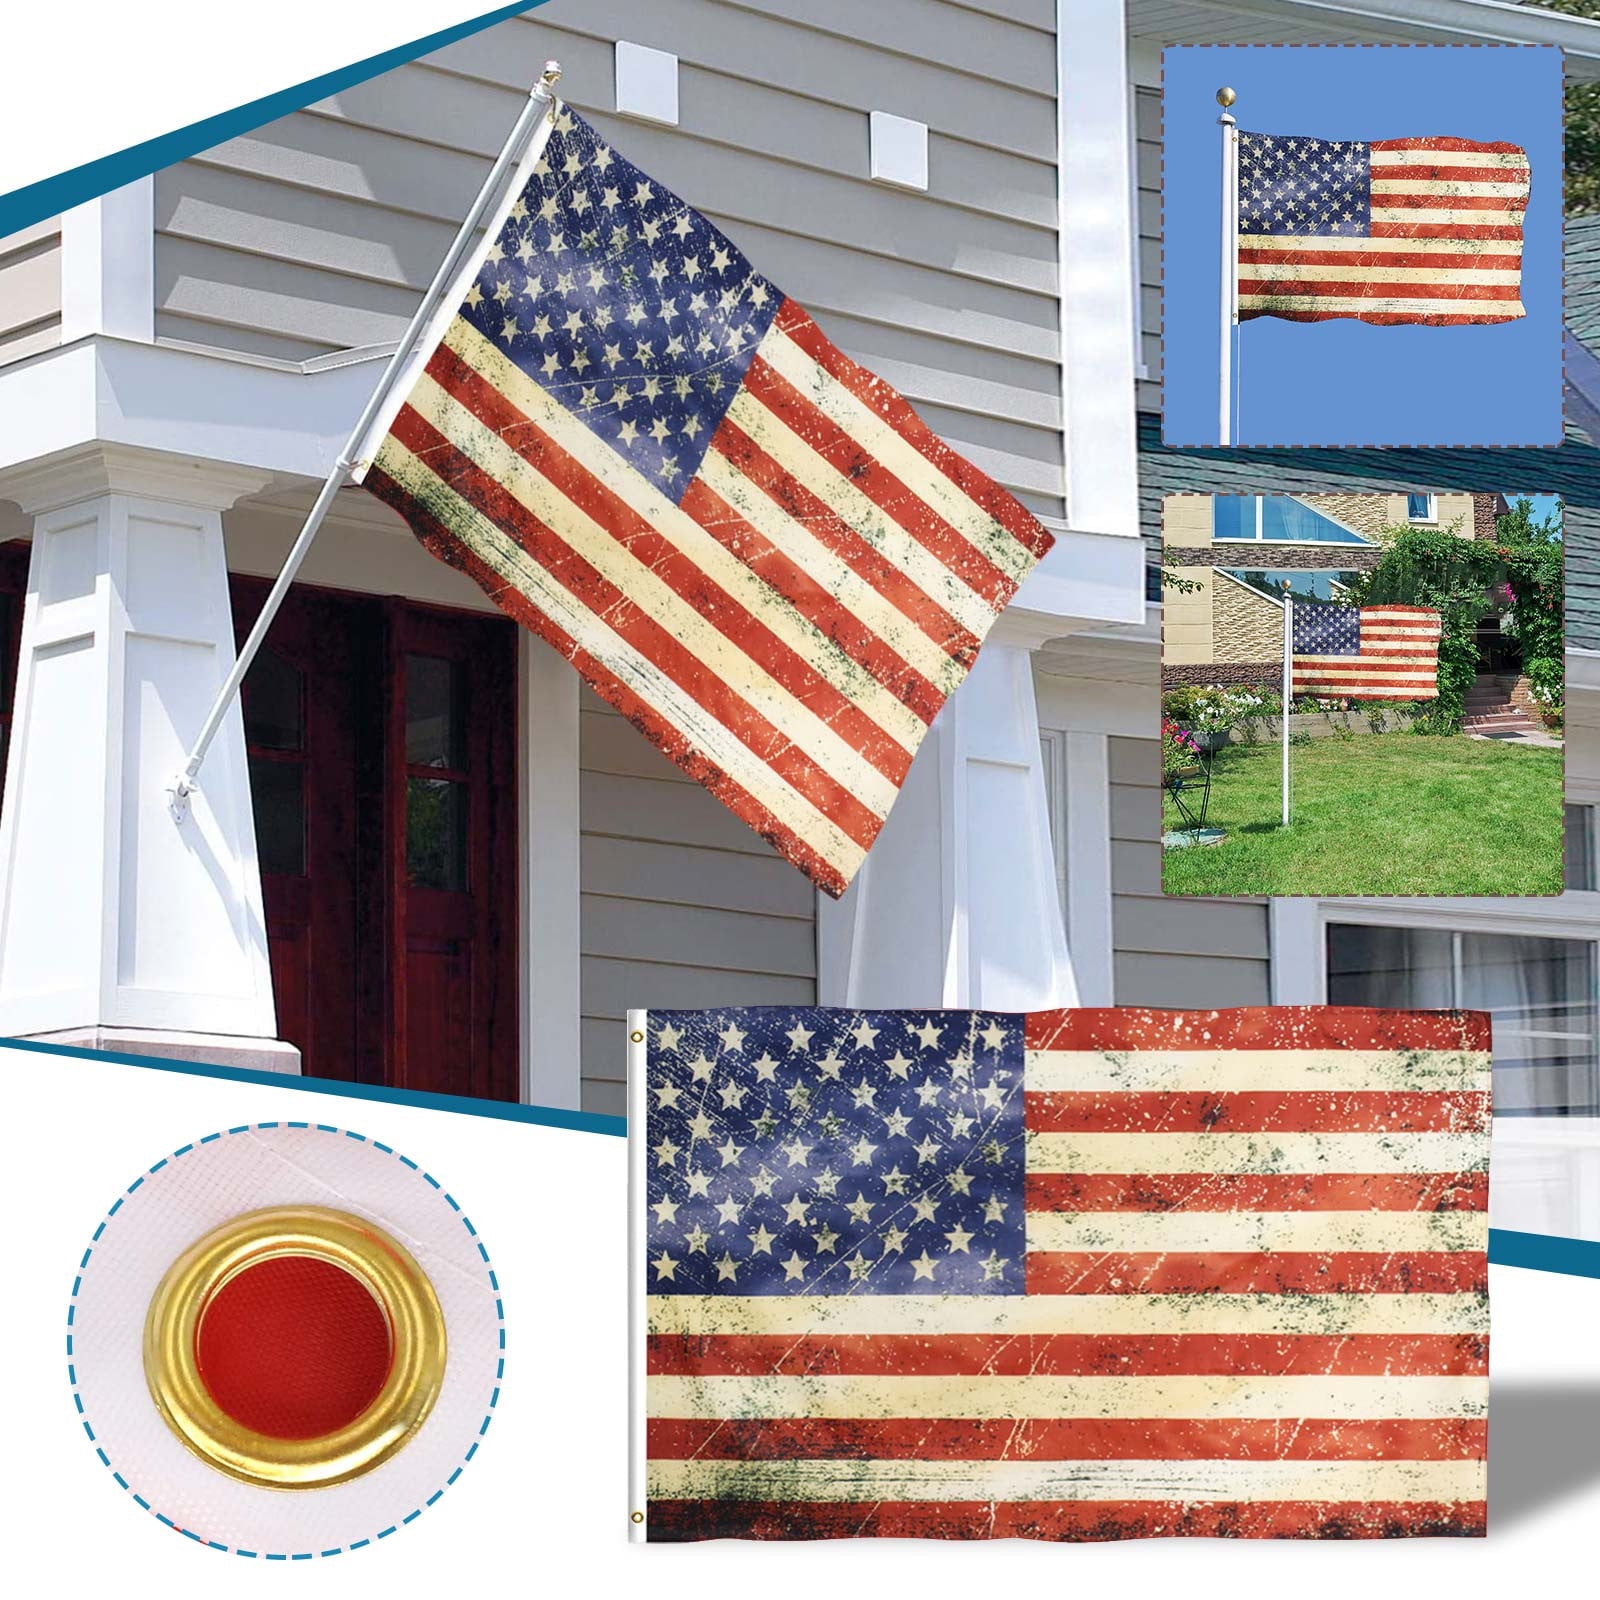 Details about   U.S Veteran Flag House and Garden Flag Home Yard Decor 